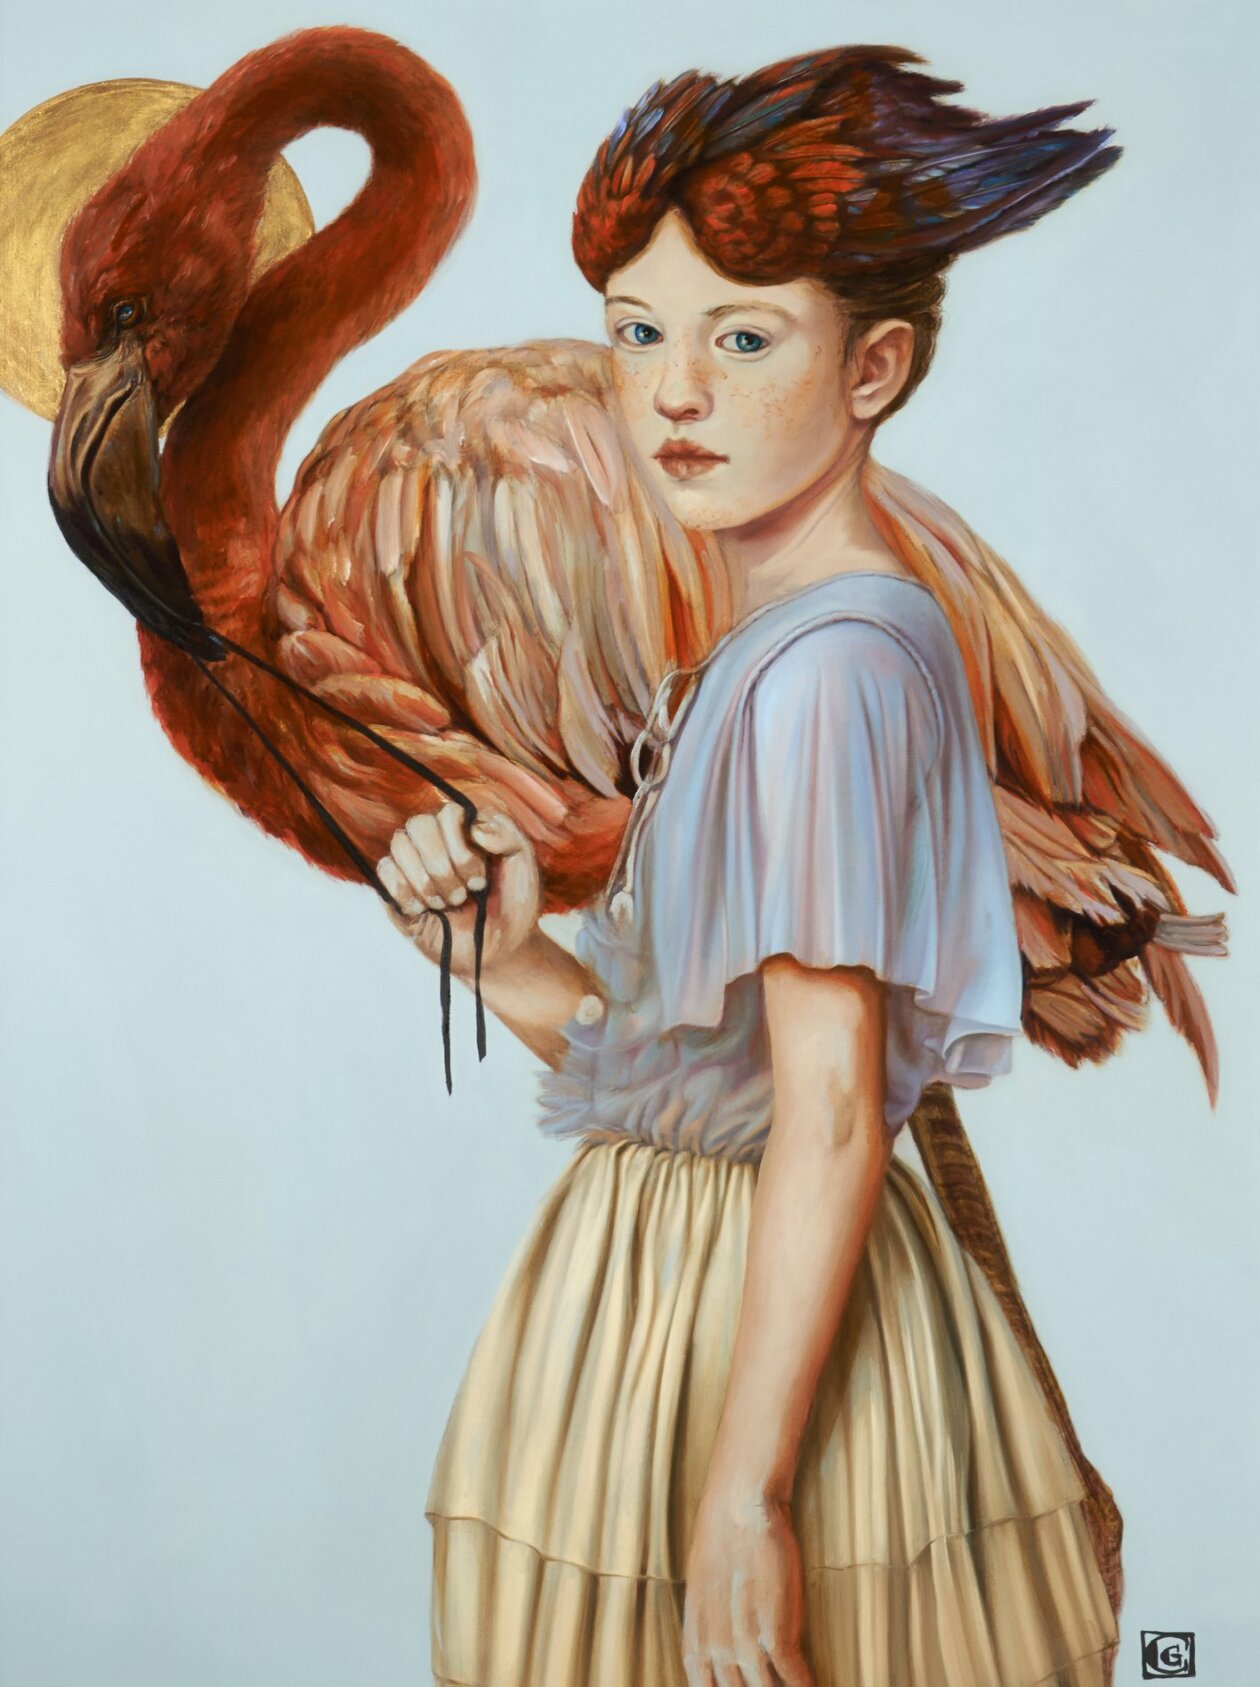 Kids And Animals, Enchanting Portrait Paintings By Claudia Giraudo (19)